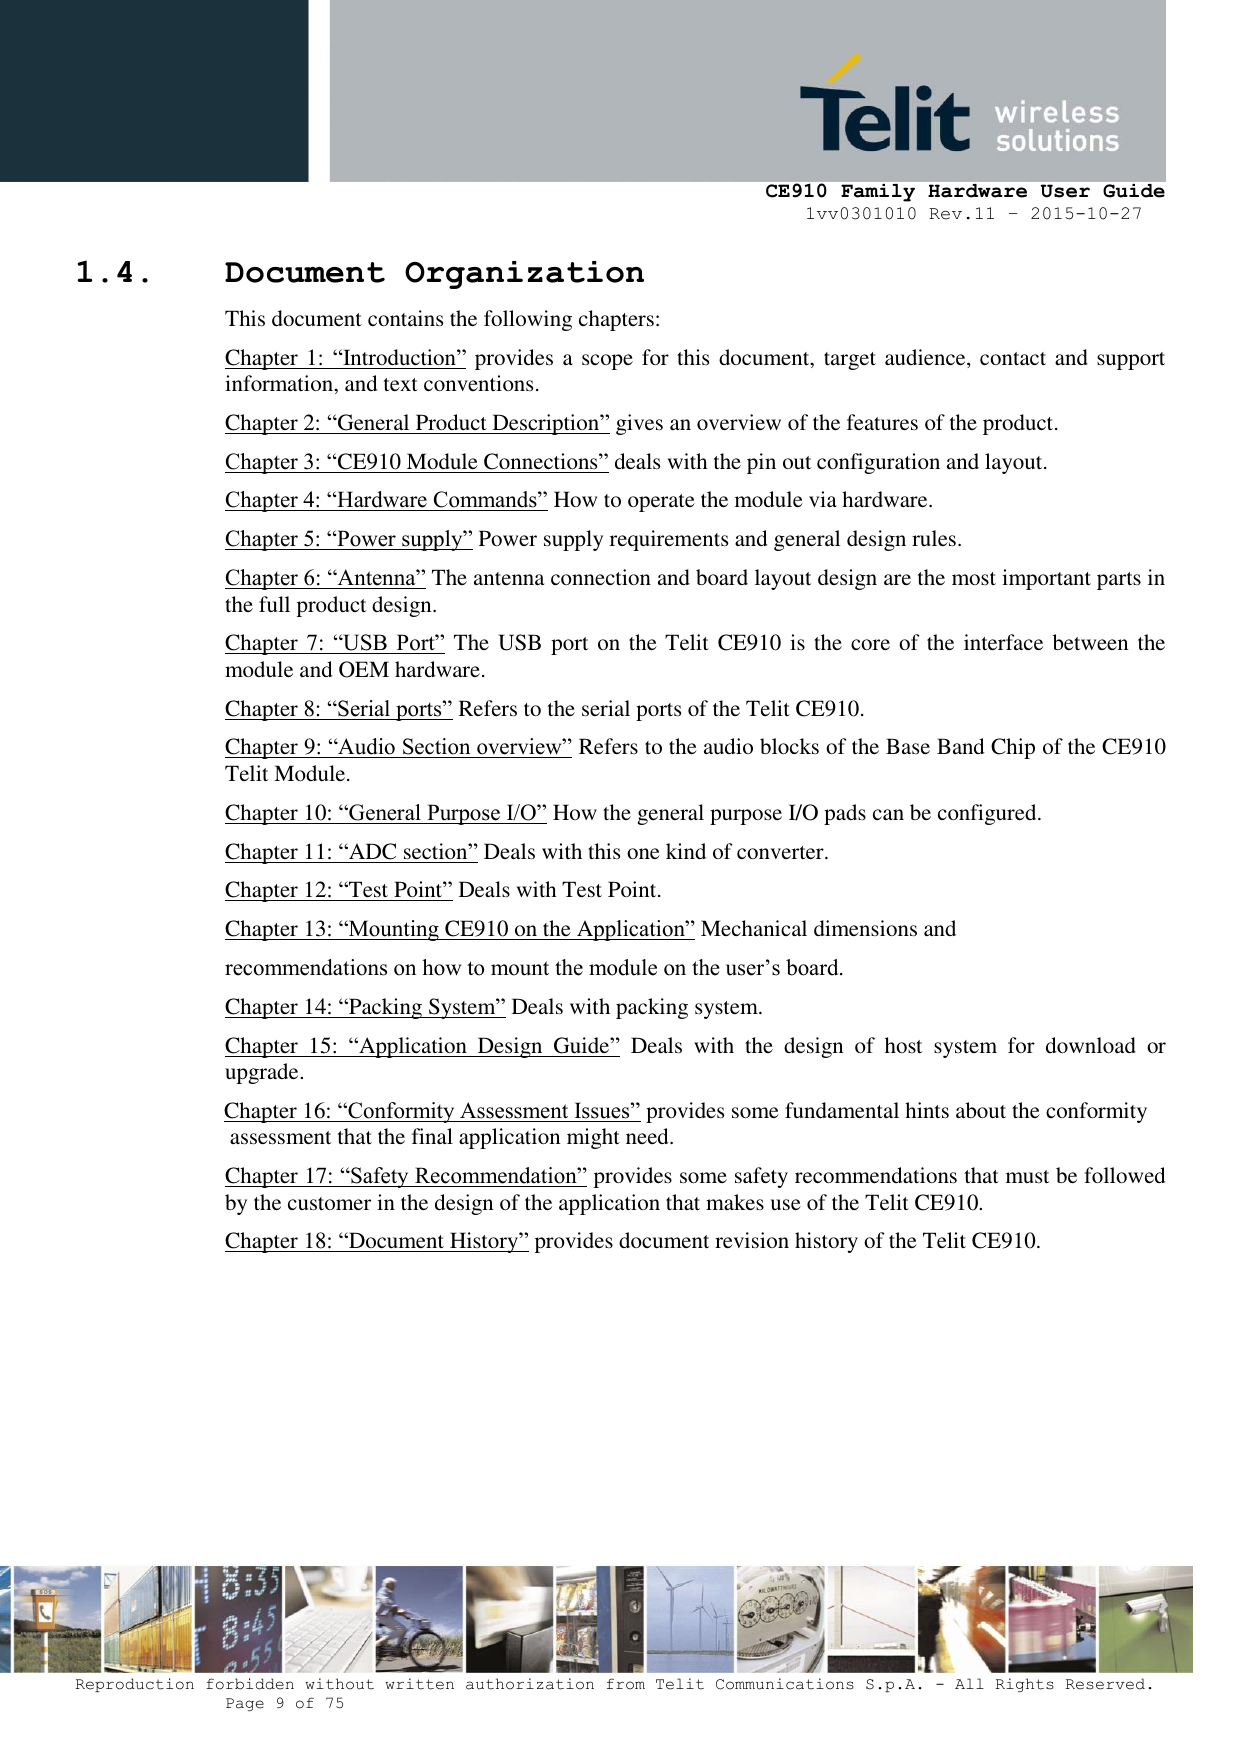     CE910 Family Hardware User Guide 1vv0301010 Rev.11 – 2015-10-27 Reproduction forbidden without written authorization from Telit Communications S.p.A. - All Rights Reserved.    Page 9 of 75                                                     1.4. Document Organization This document contains the following chapters: Chapter 1: “Introduction” provides a scope for this document, target audience, contact and support information, and text conventions. Chapter 2: “General Product Description” gives an overview of the features of the product. Chapter 3: “CE910 Module Connections” deals with the pin out configuration and layout. Chapter 4: “Hardware Commands” How to operate the module via hardware. Chapter 5: “Power supply” Power supply requirements and general design rules.  Chapter 6: “Antenna” The antenna connection and board layout design are the most important parts in the full product design.  Chapter 7:  “USB  Port” The USB port on the Telit  CE910 is the core of the interface between the module and OEM hardware. Chapter 8: “Serial ports” Refers to the serial ports of the Telit CE910. Chapter 9: “Audio Section overview” Refers to the audio blocks of the Base Band Chip of the CE910 Telit Module.  Chapter 10: “General Purpose I/O” How the general purpose I/O pads can be configured.  Chapter 11: “ADC section” Deals with this one kind of converter.  Chapter 12: “Test Point” Deals with Test Point.  Chapter 13: “Mounting CE910 on the Application” Mechanical dimensions and recommendations on how to mount the module on the user’s board. Chapter 14: “Packing System” Deals with packing system.  Chapter  15:  “Application  Design  Guide”  Deals  with  the  design  of  host  system  for  download  or upgrade.  Chapter 16: “Conformity Assessment Issues” provides some fundamental hints about the conformity  assessment that the final application might need. Chapter 17: “Safety Recommendation” provides some safety recommendations that must be followed by the customer in the design of the application that makes use of the Telit CE910. Chapter 18: “Document History” provides document revision history of the Telit CE910.        